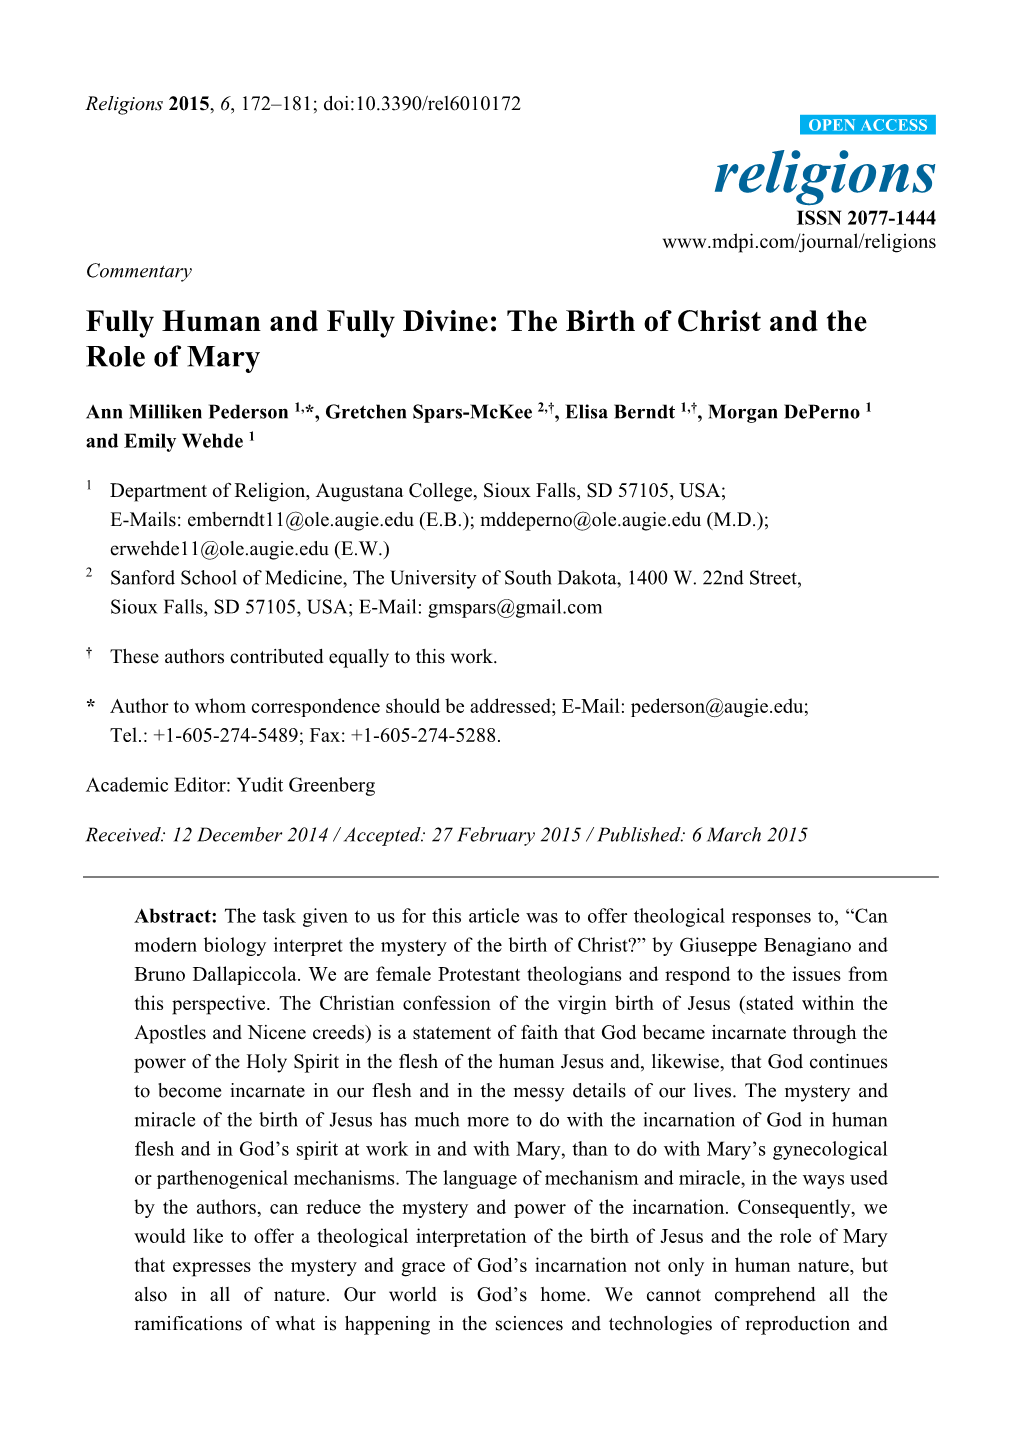 Fully Human and Fully Divine: the Birth of Christ and the Role of Mary